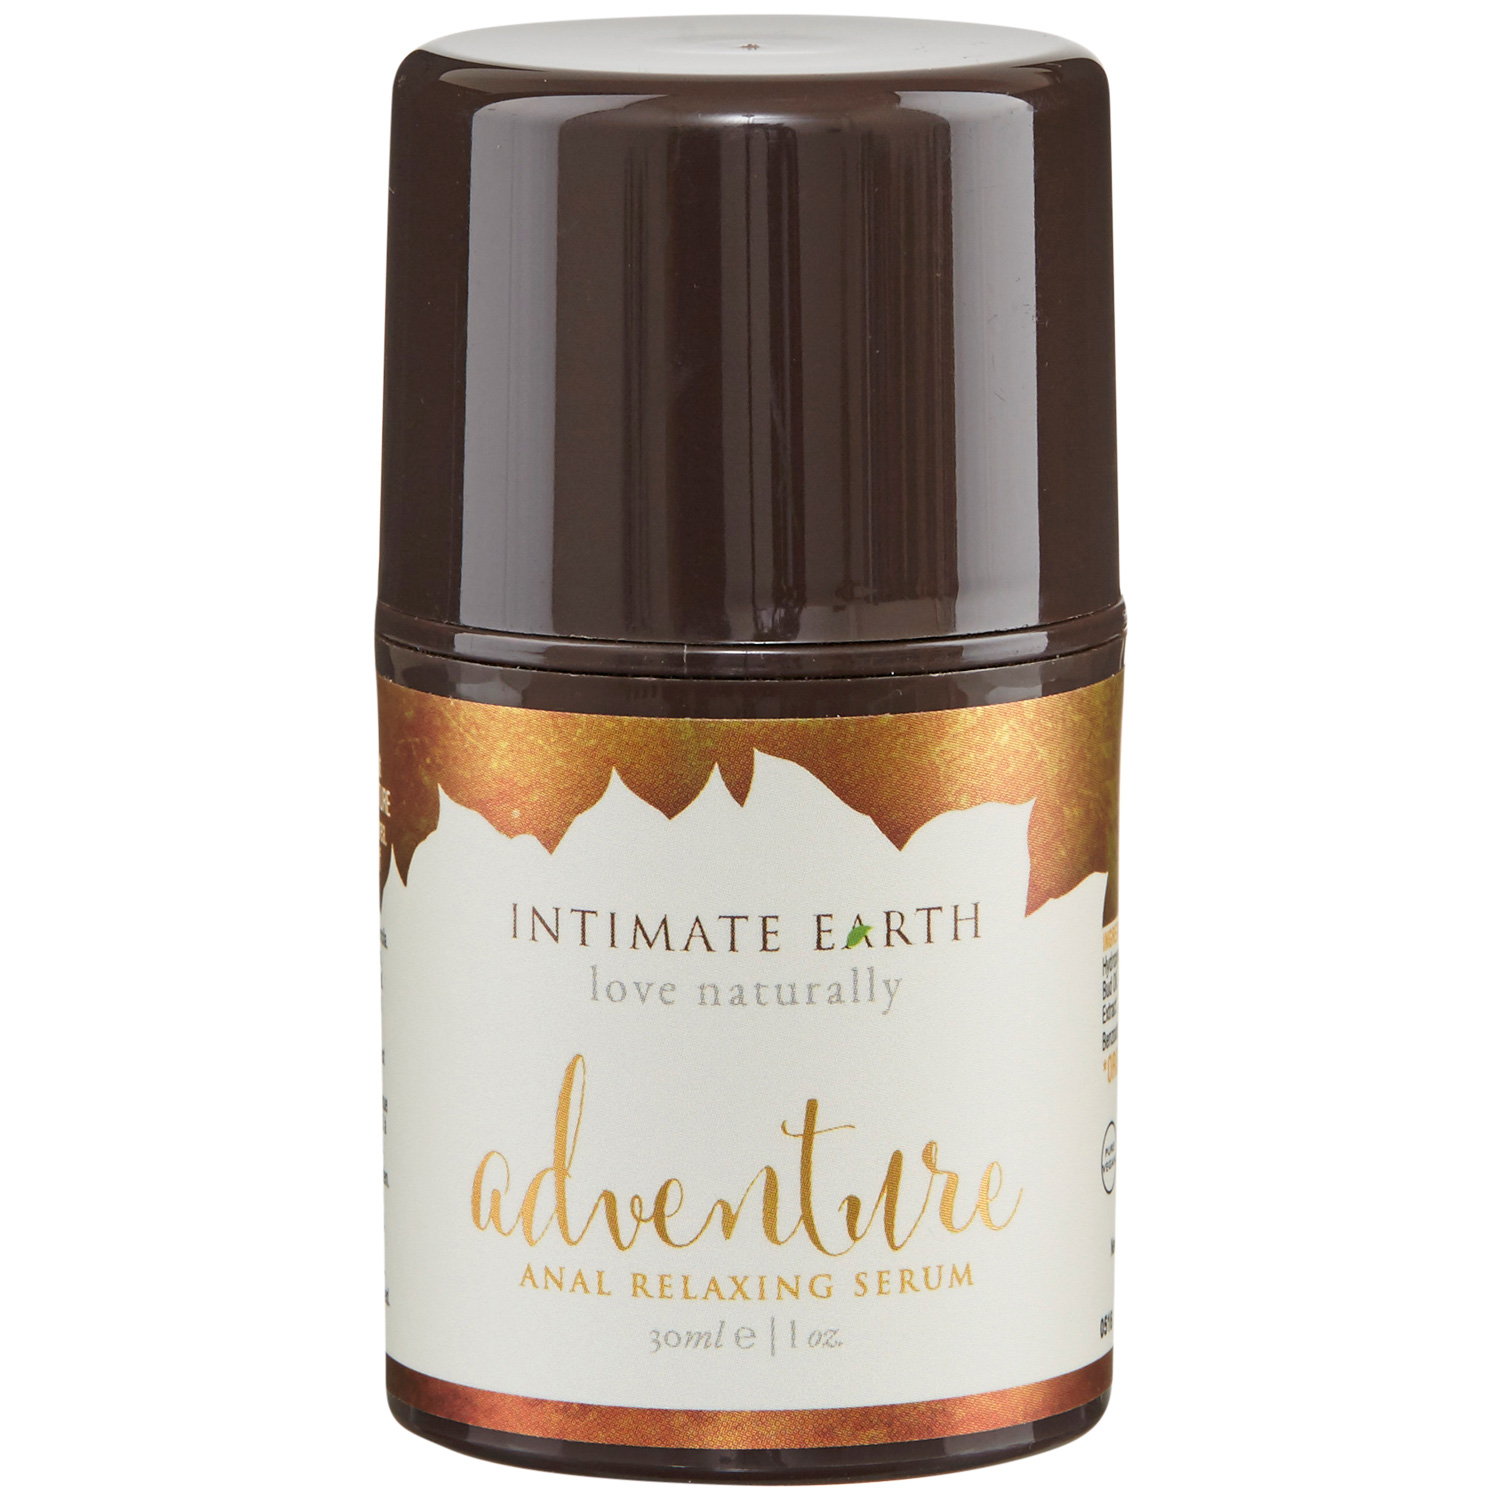 Intimate Earth Adventure Anal Relaxing Serum 30 ml - Clear thumbnail